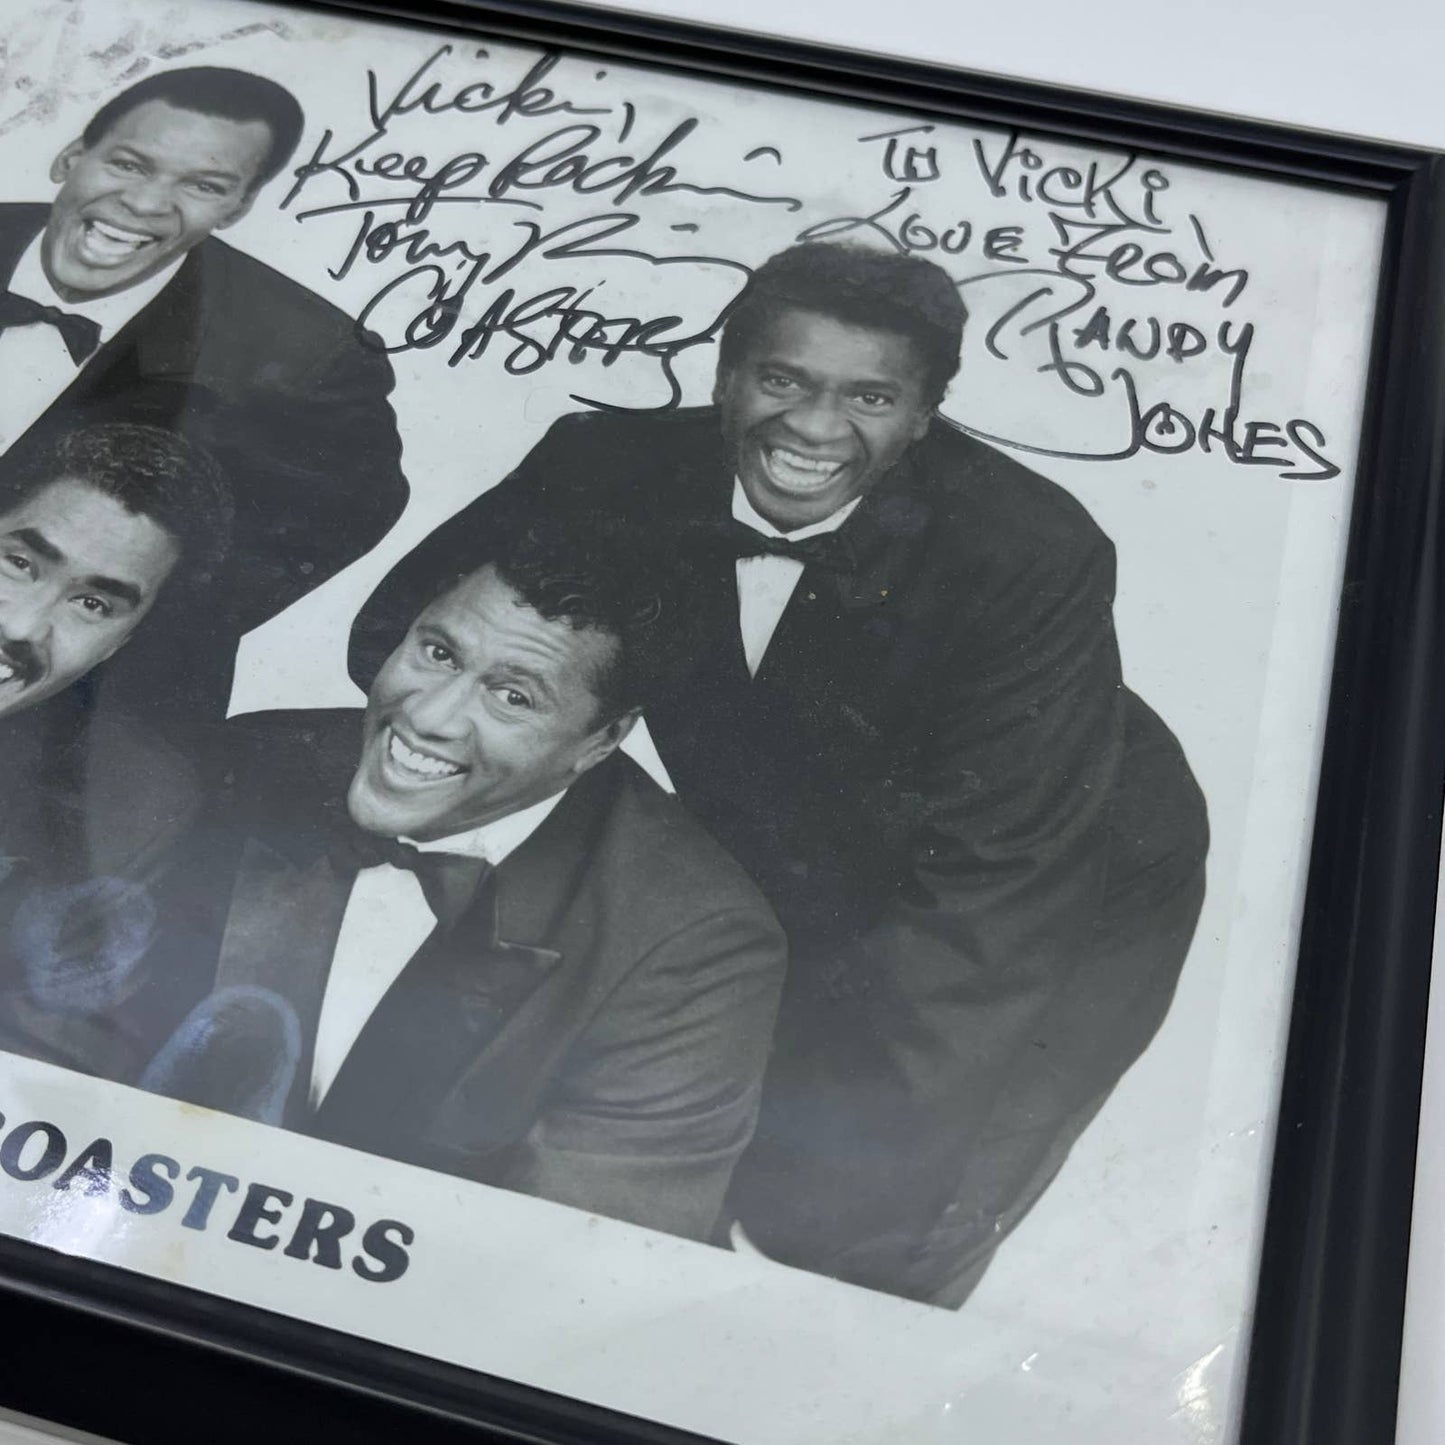 Vintage The Coasters Photo Autographed by All 4 Members TG3